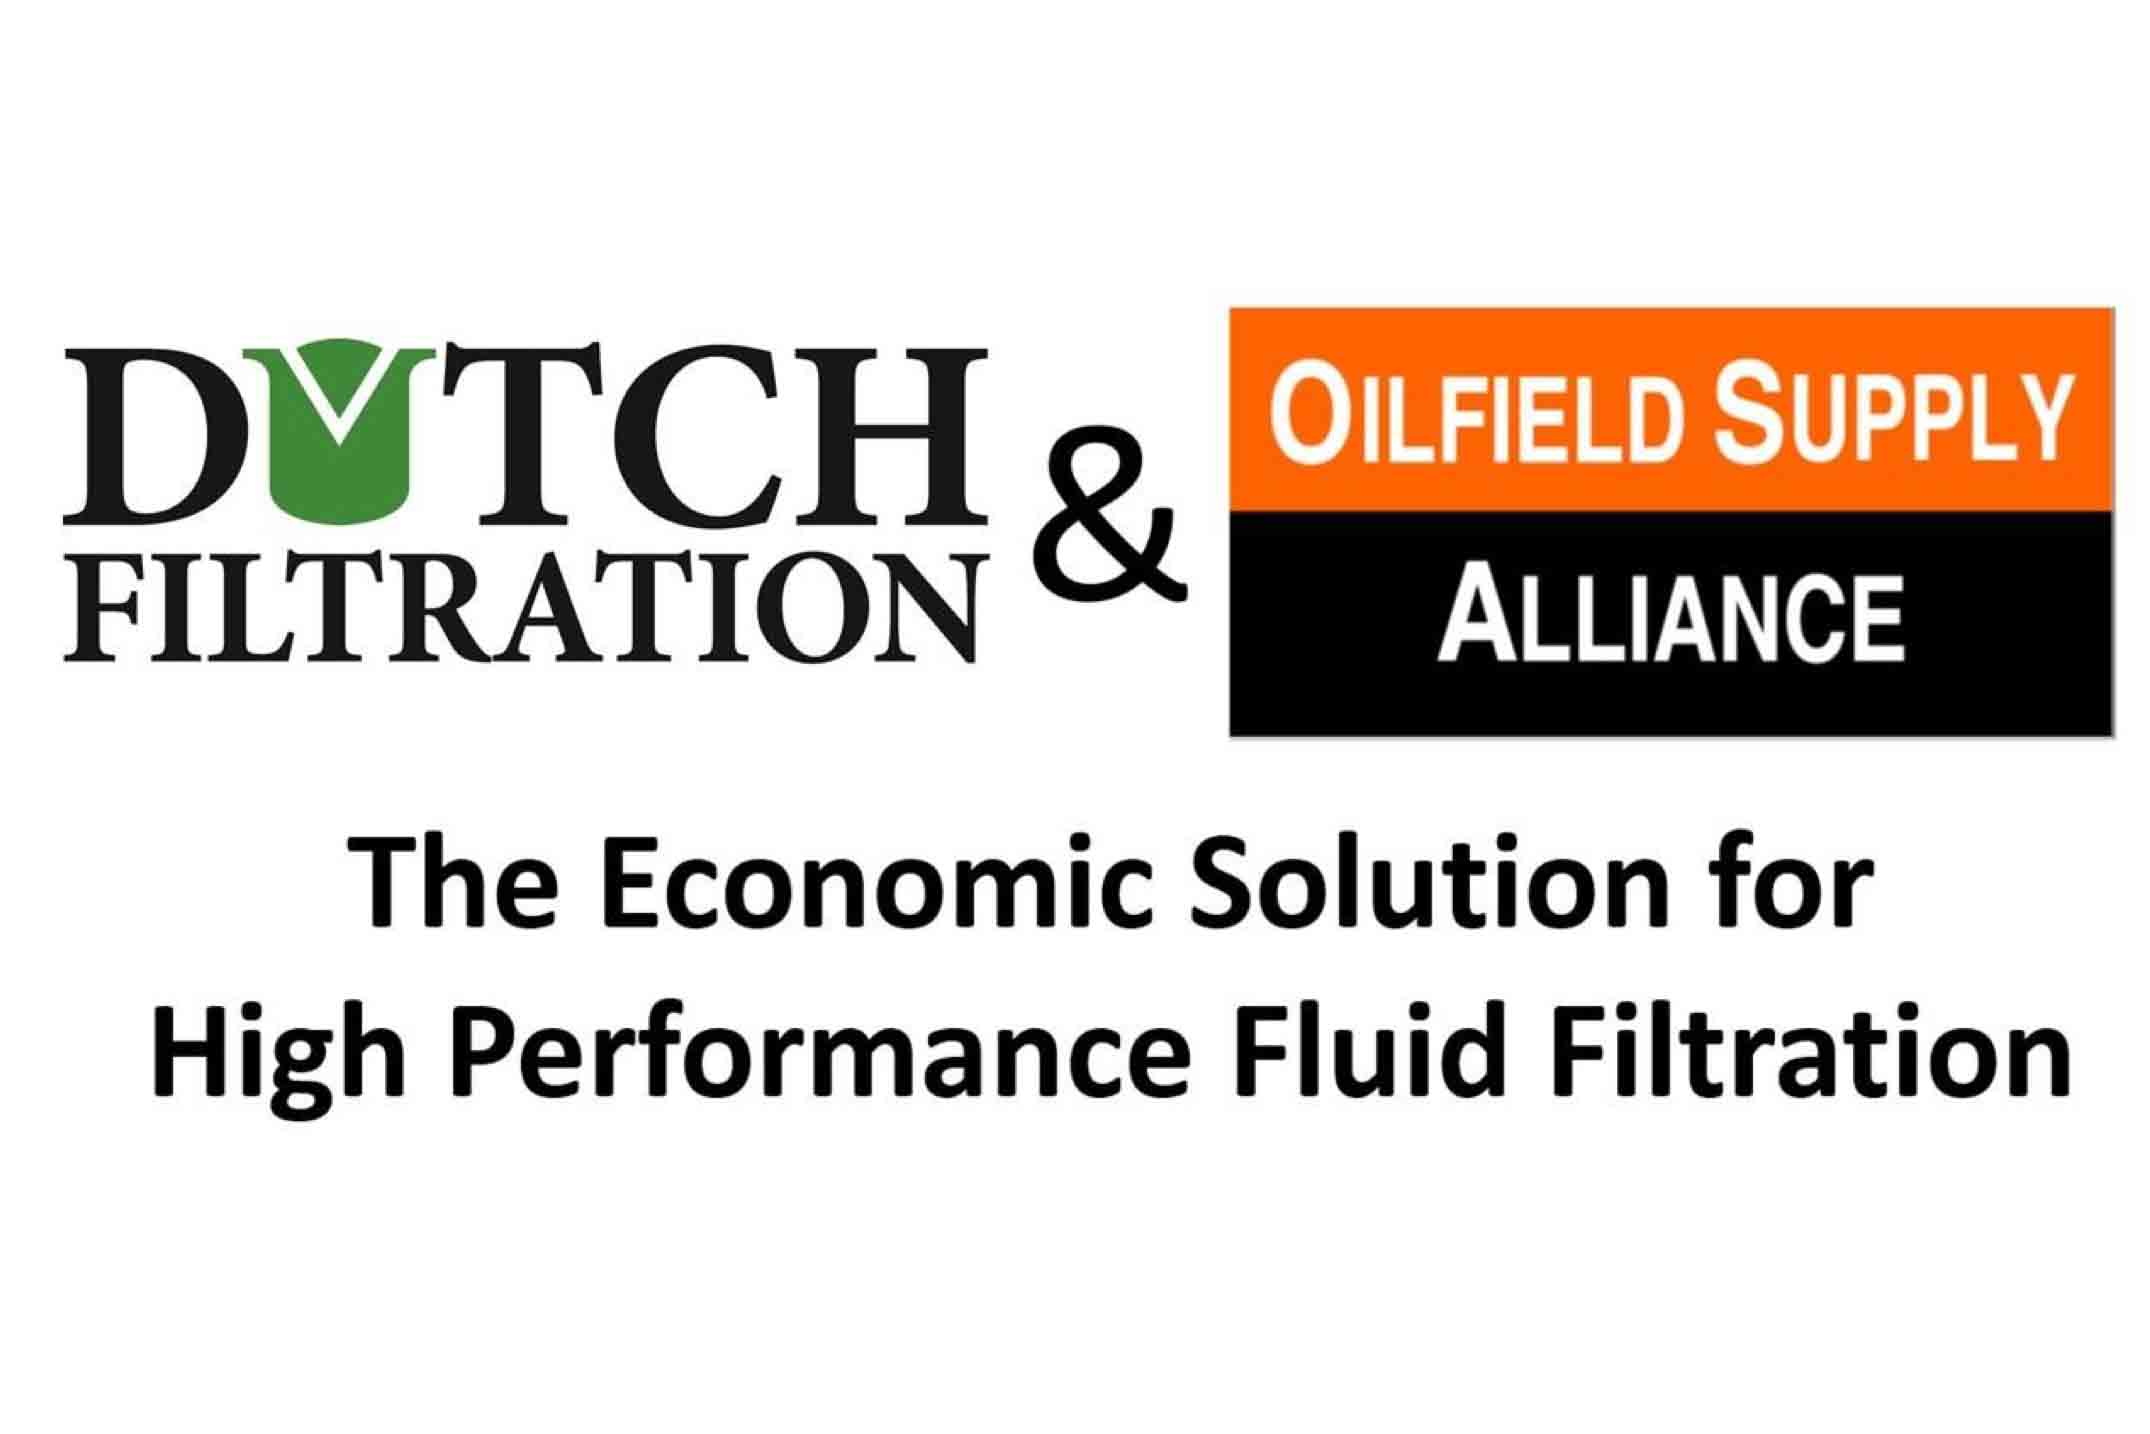 Dutch-Filtration and OSA